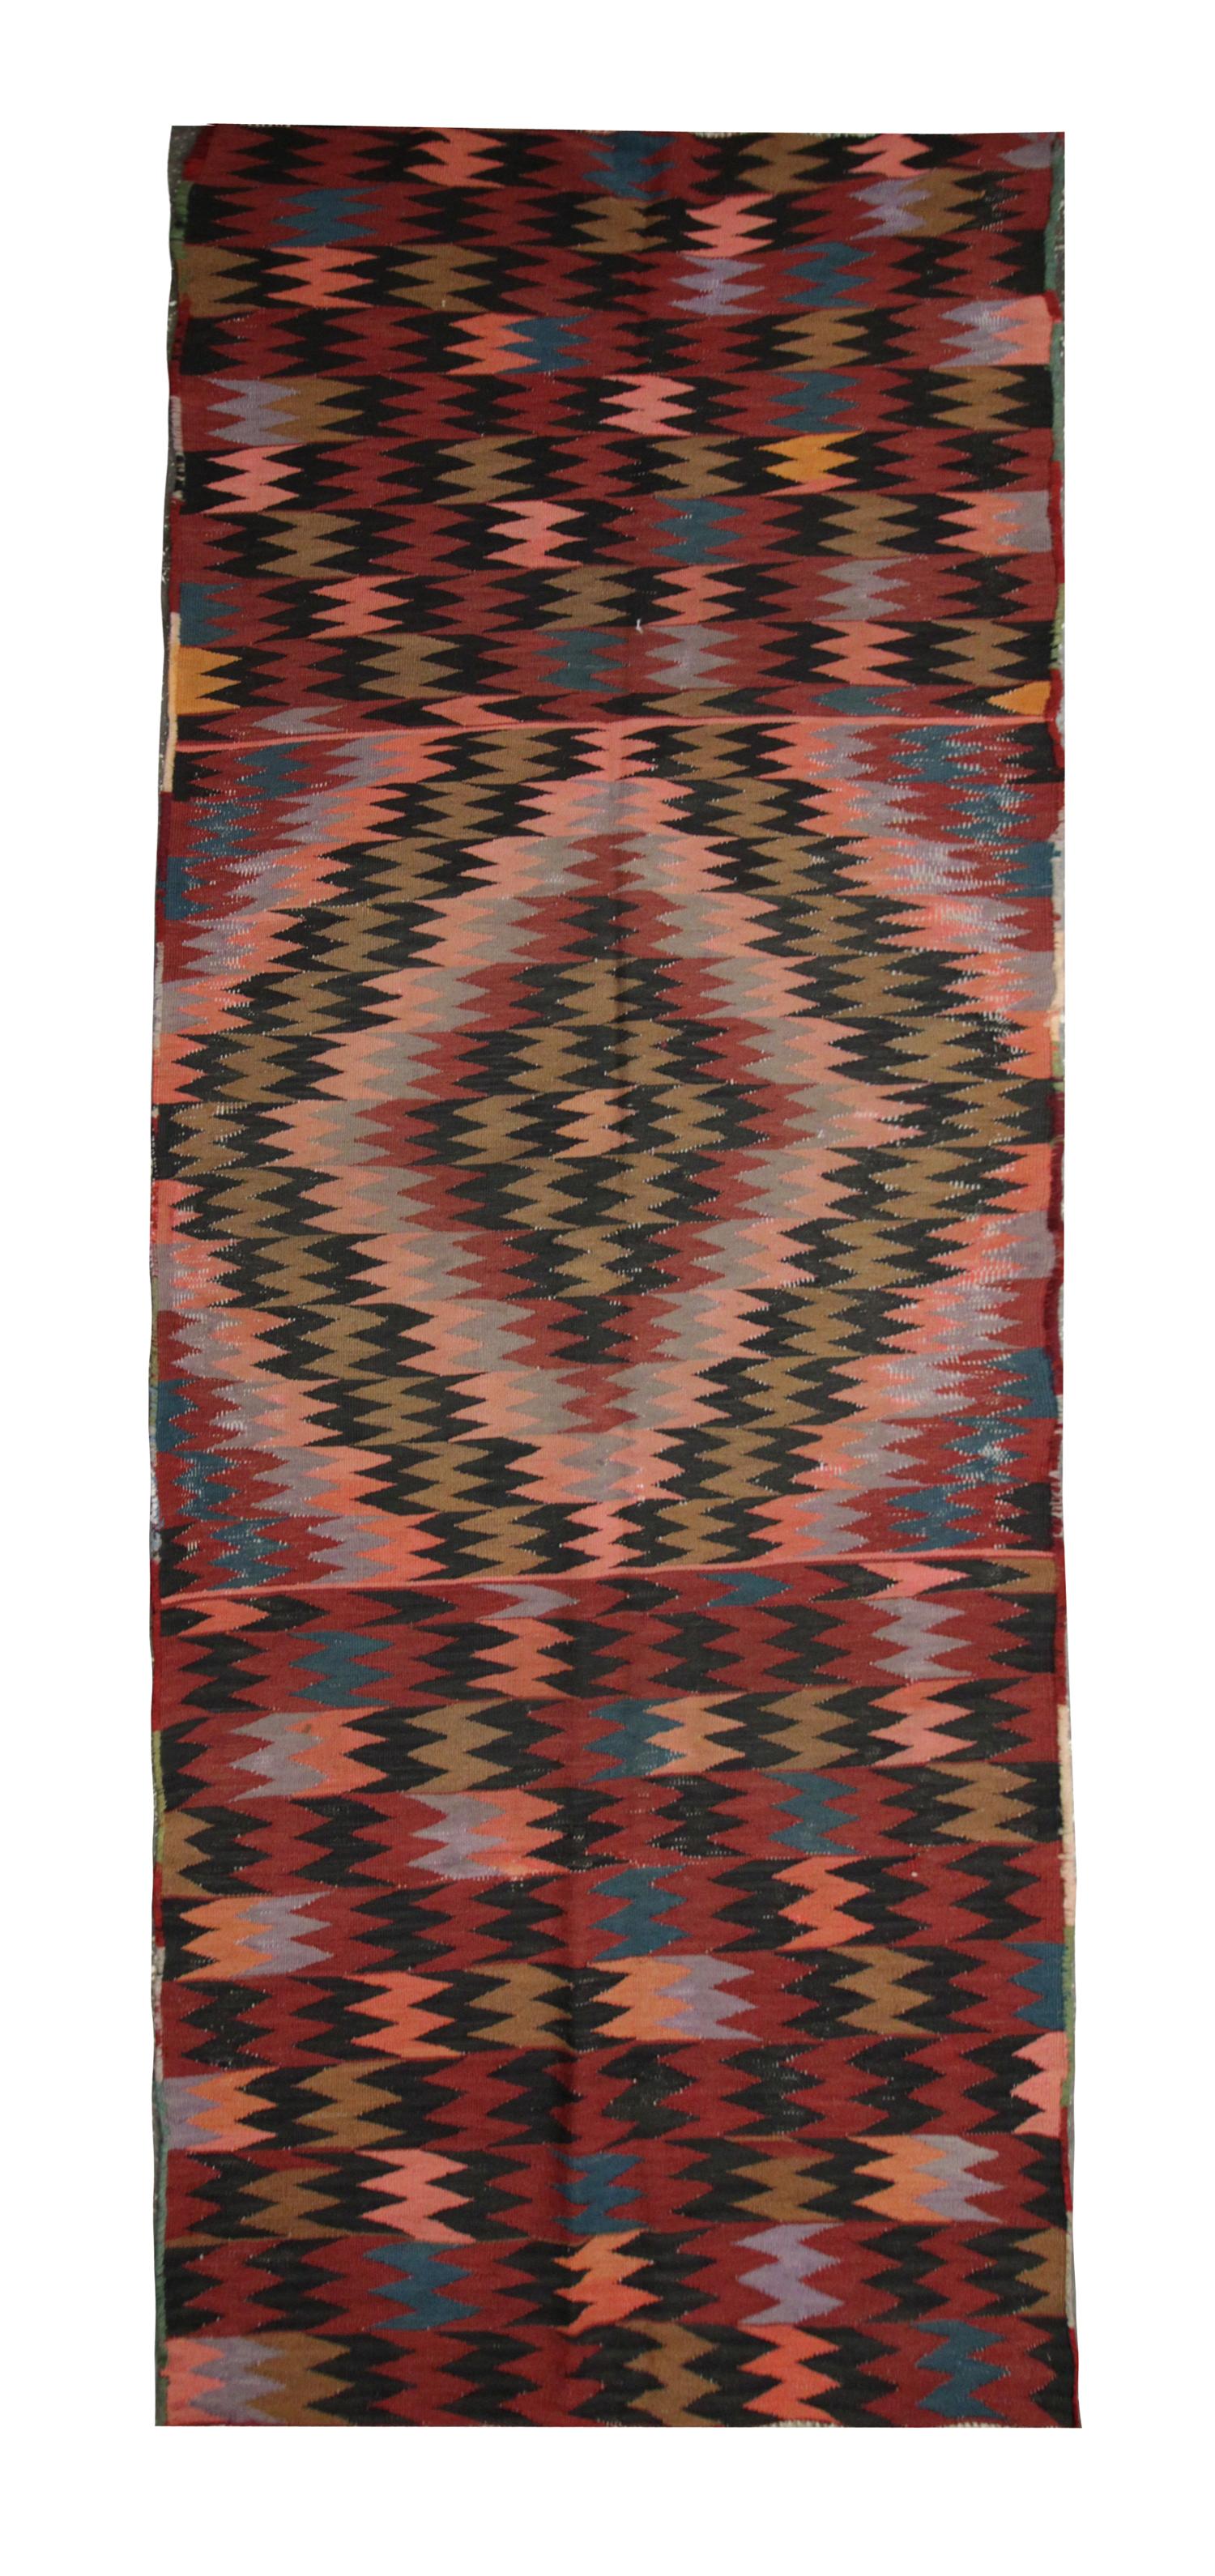 This fine wool Kilim Runner is a modern flat-weave Kilim rug constructed in the early 2000s. The design features a repeat geometric design woven with a vibrant colour palette including rust, beige and brown that make up the repeat geometric design.